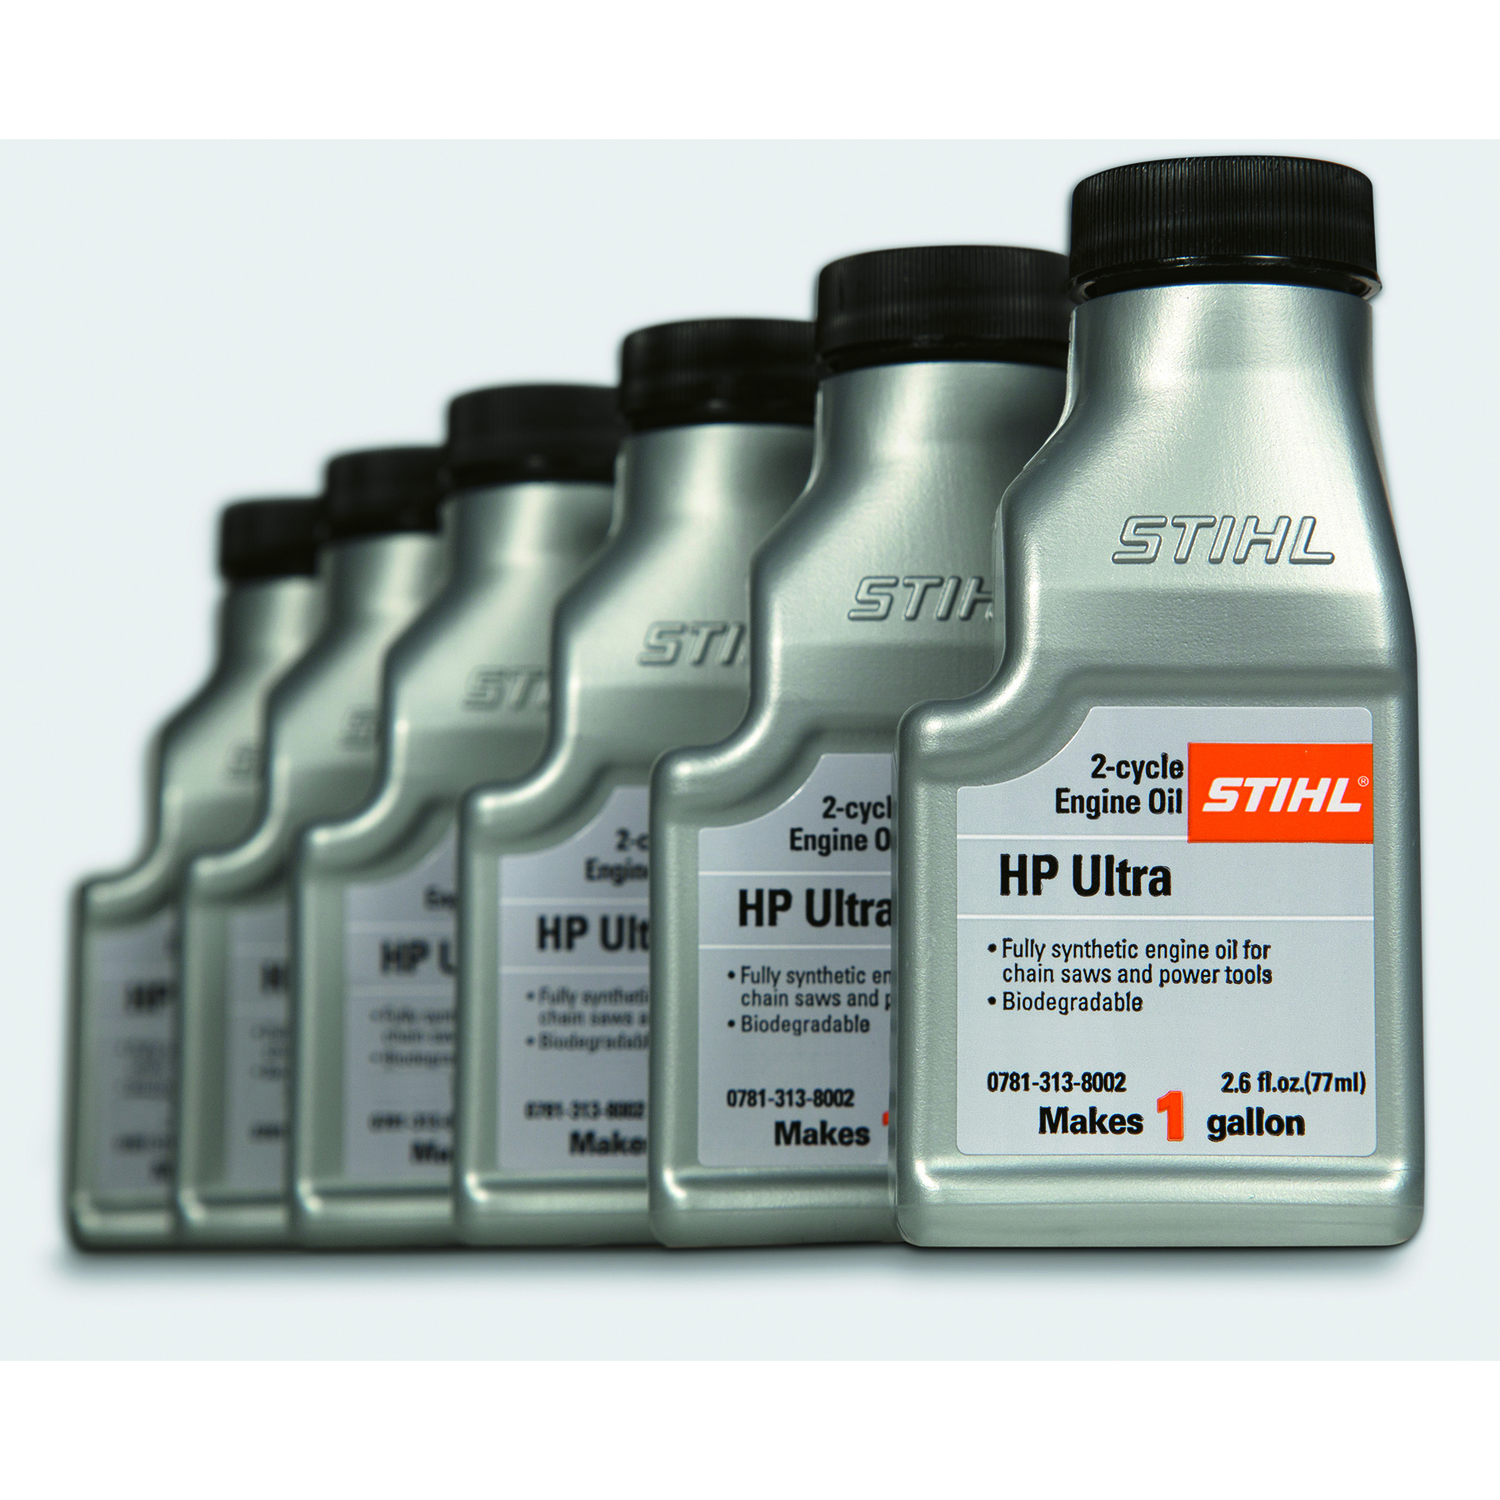 STIHL MotoMix four 1/2 gallon containers of Ethanol-Free 2-Cycle 50:1 Pre-Mixed  Fuel 1/2 gal - Ace Hardware